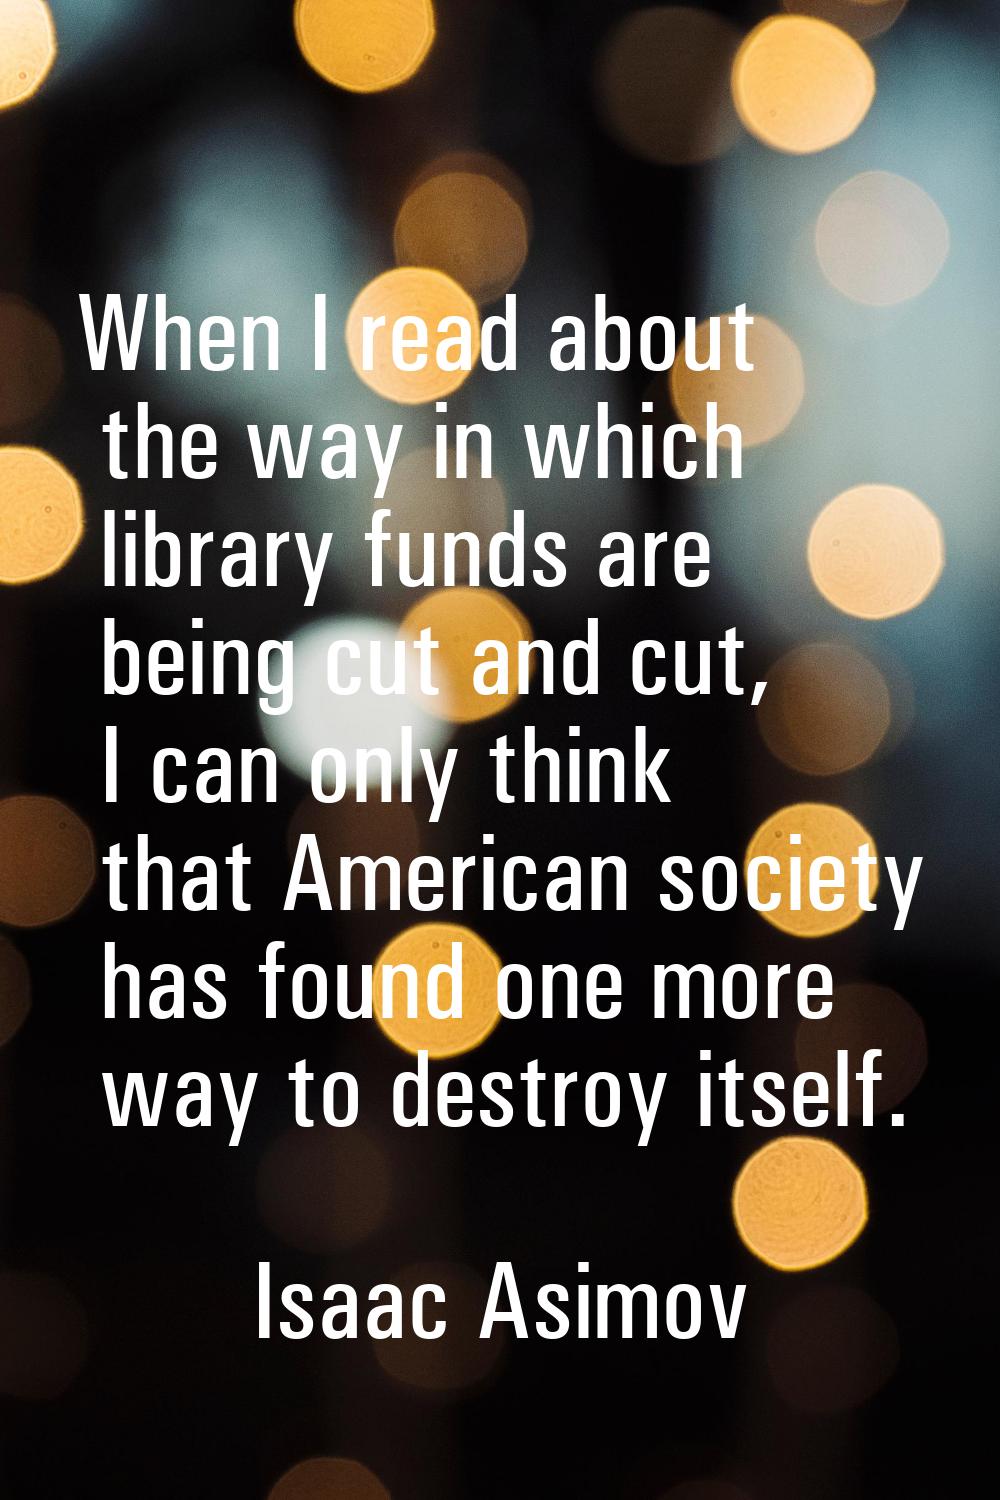 When I read about the way in which library funds are being cut and cut, I can only think that Ameri